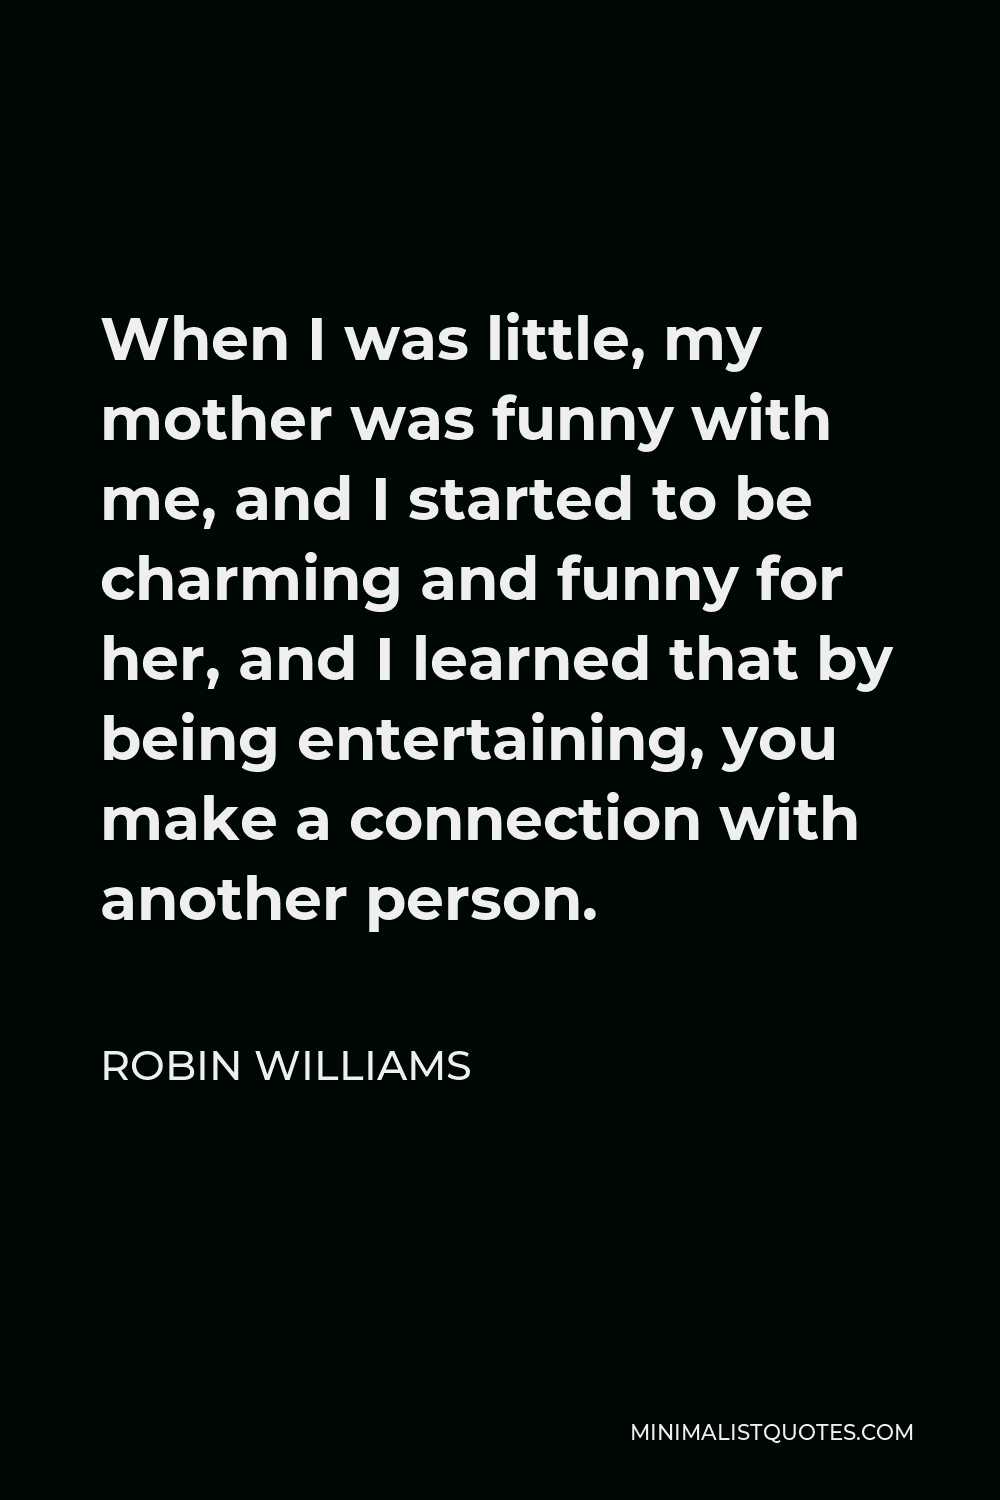 Robin Williams Quote - When I was little, my mother was funny with me, and I started to be charming and funny for her, and I learned that by being entertaining, you make a connection with another person.